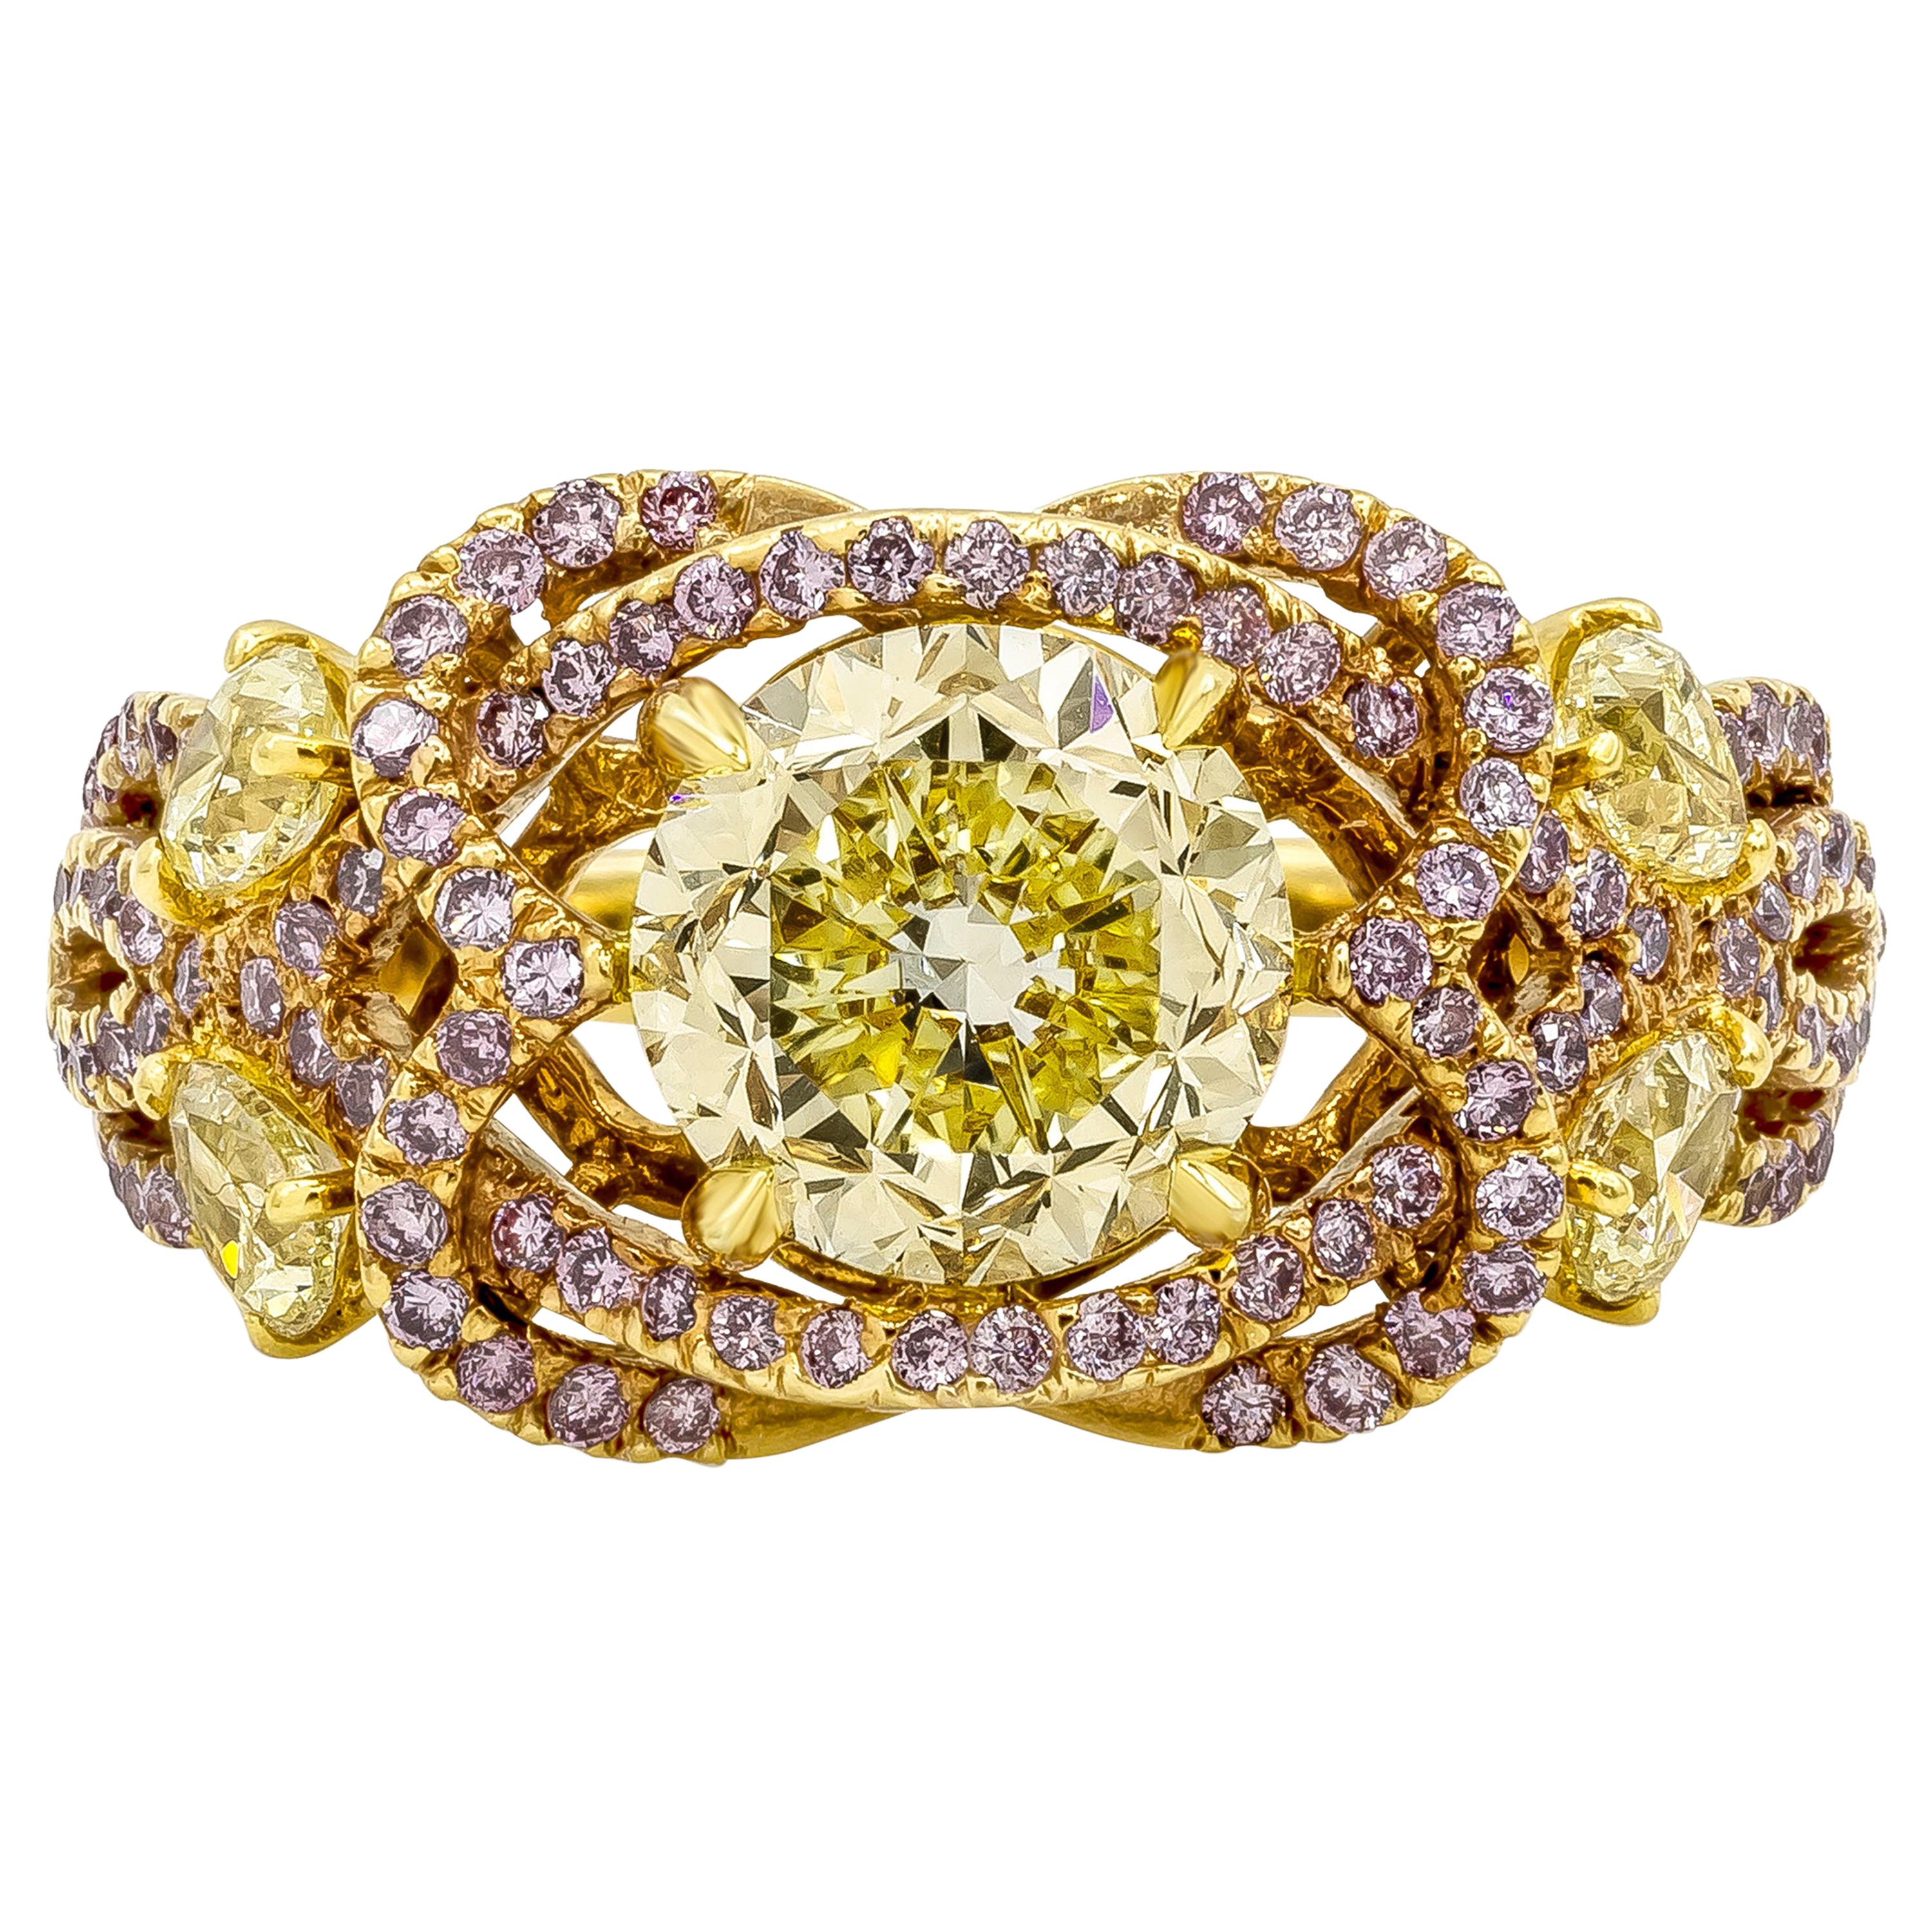 1.97 Carats Mixed Cut Fancy Intense Yellow and Pink Diamond Engagement Ring